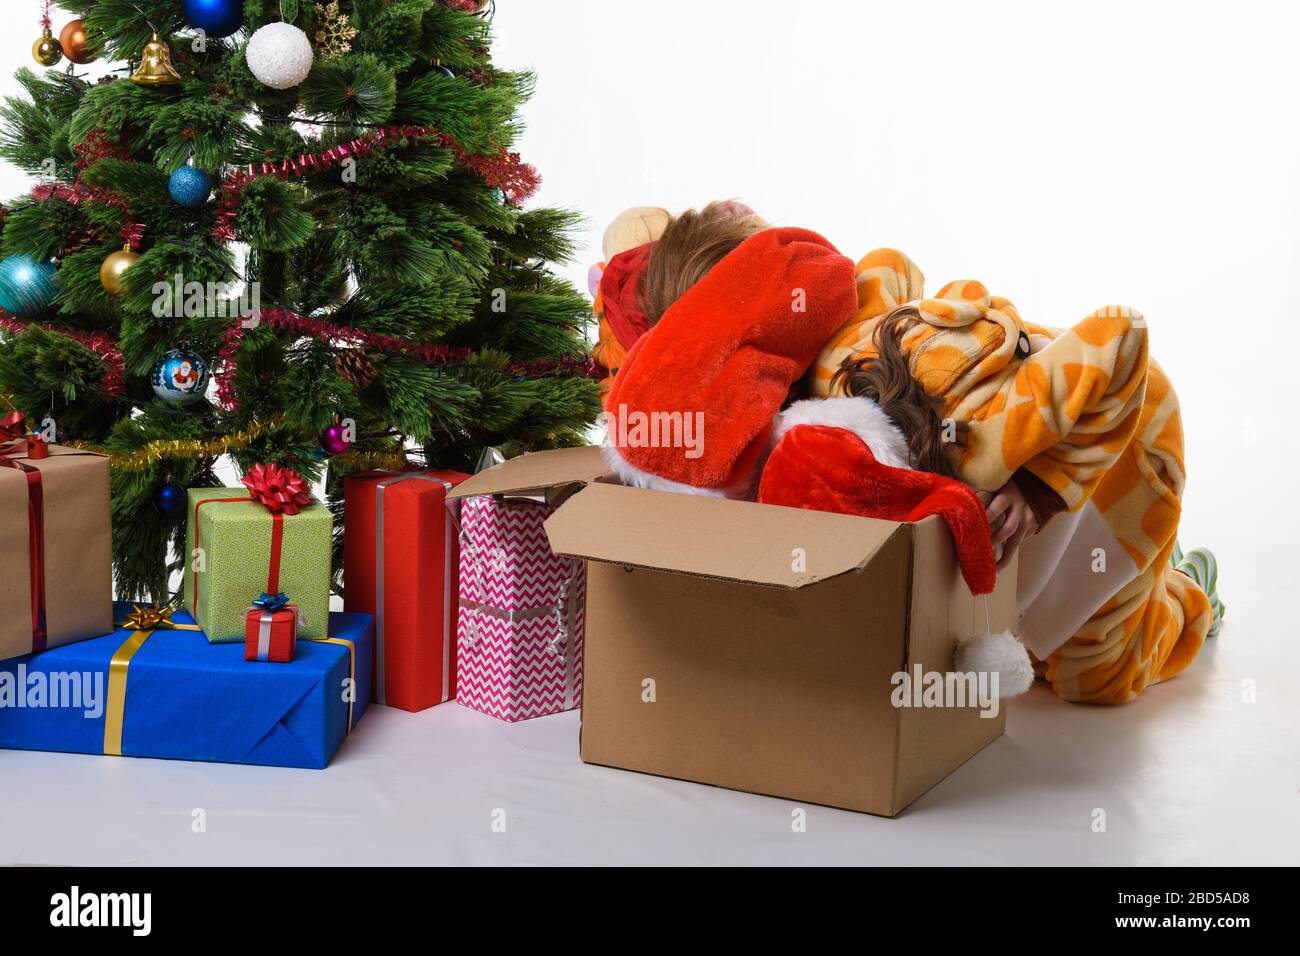 Two girls crawled headlong into a box with New Year's toys Stock Photo